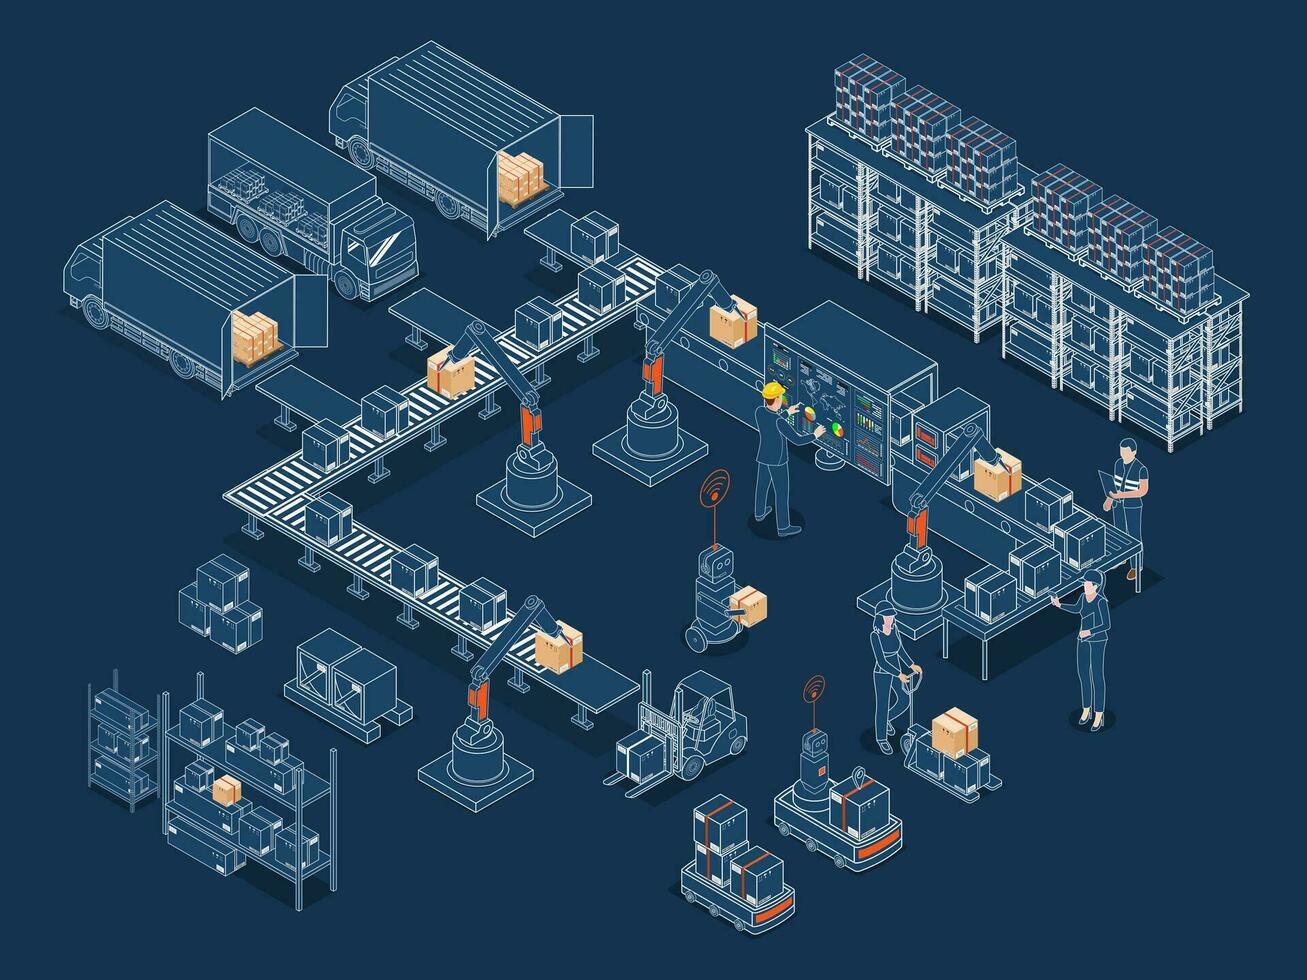 Automated warehouse robots and Smart warehouse technology Concept with Warehouse Automation System, Autonomous robot, Transportation operation service. Vector illustration EPS 10